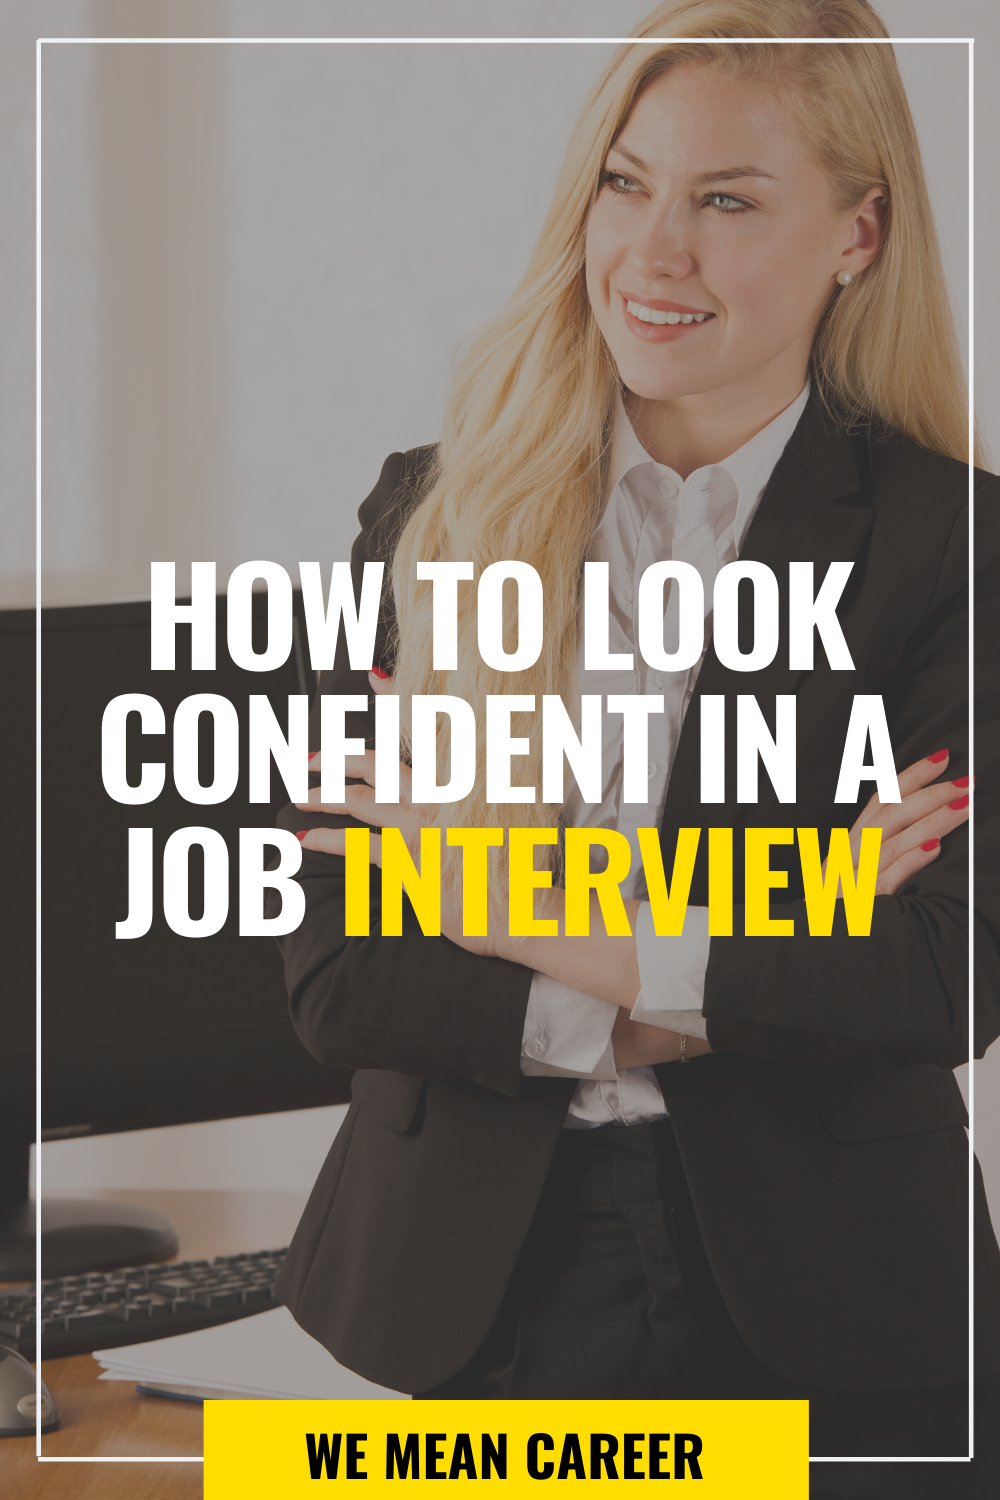 Confidence on the job interview